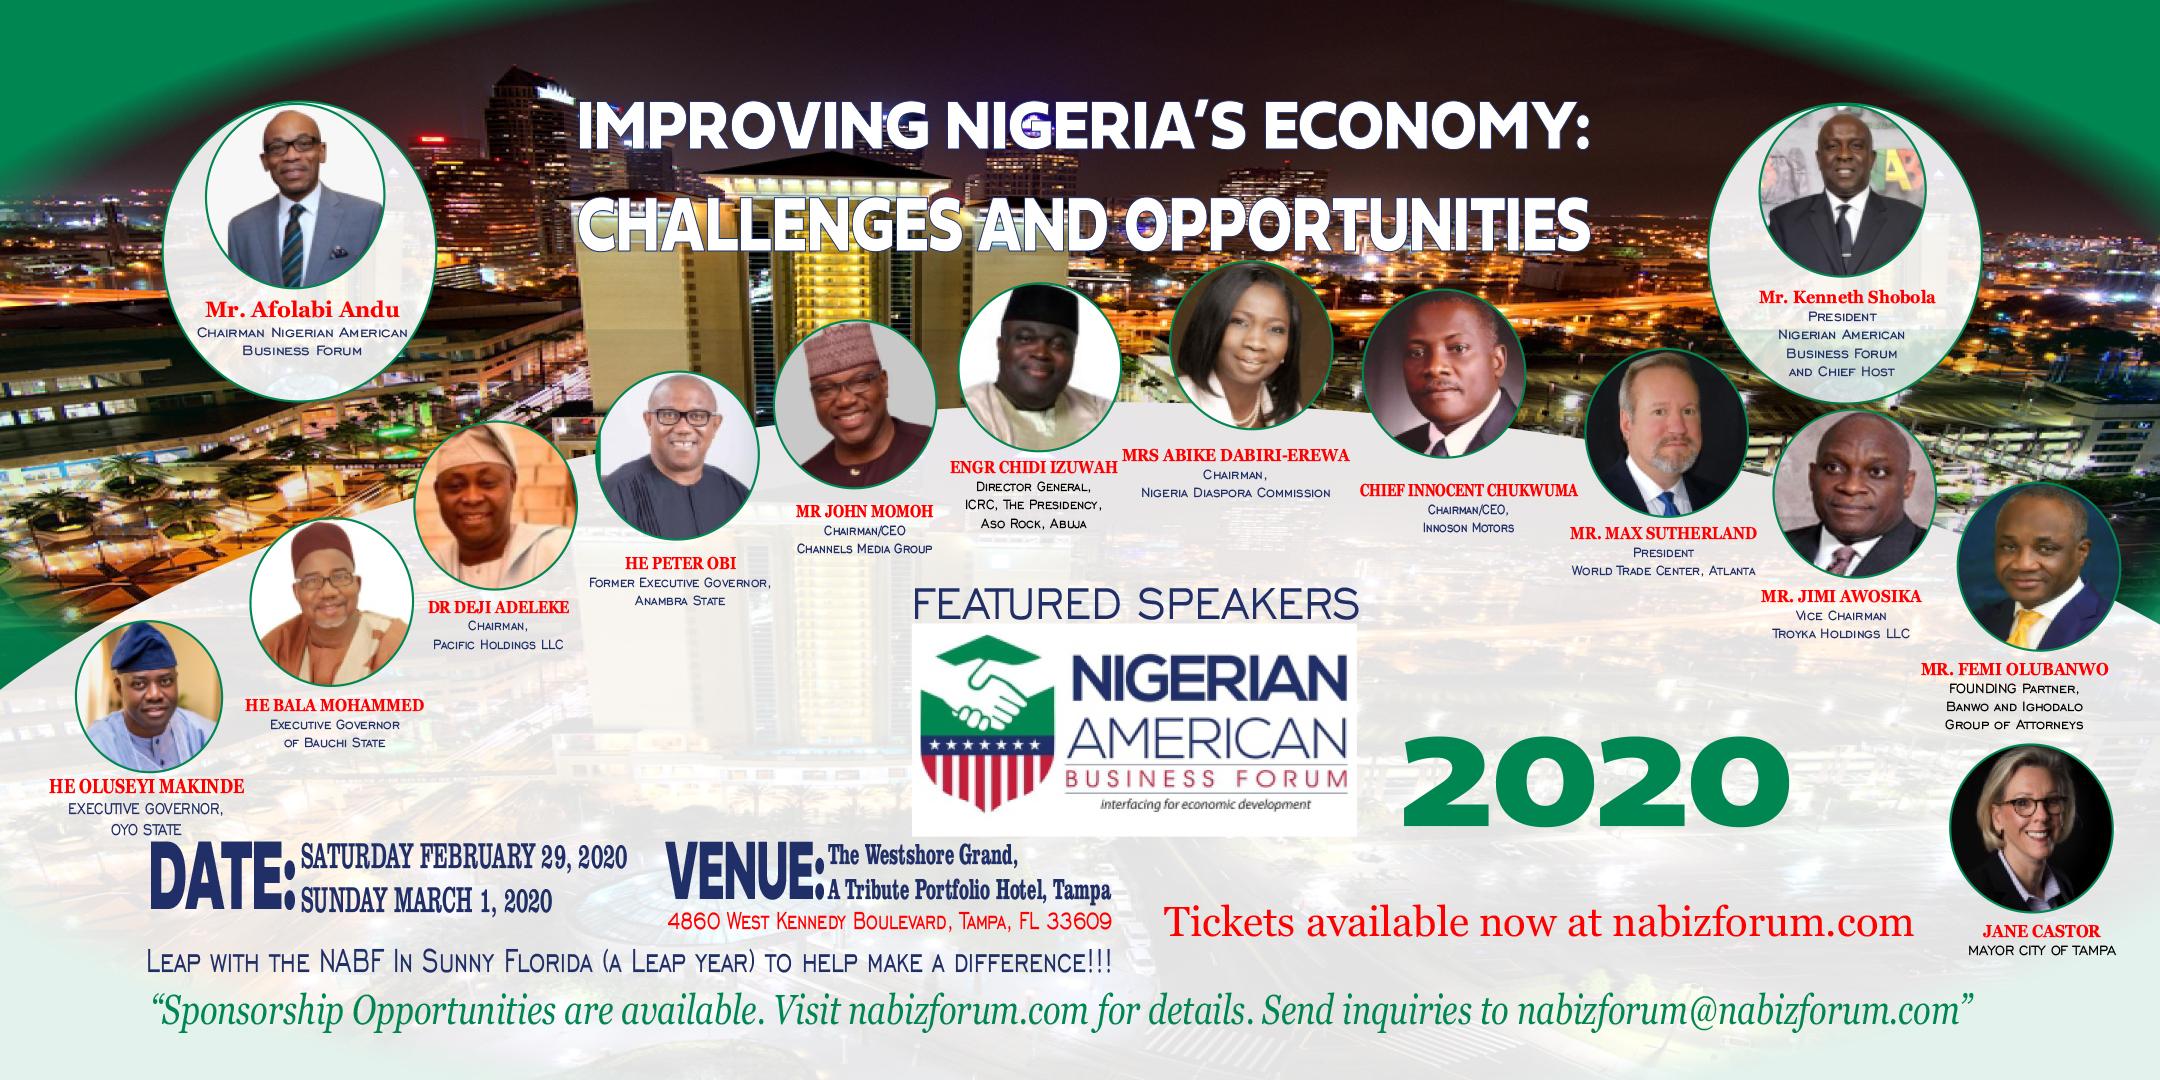 The 2020 Nigerian American Business Forum (NABF) Annual Conference